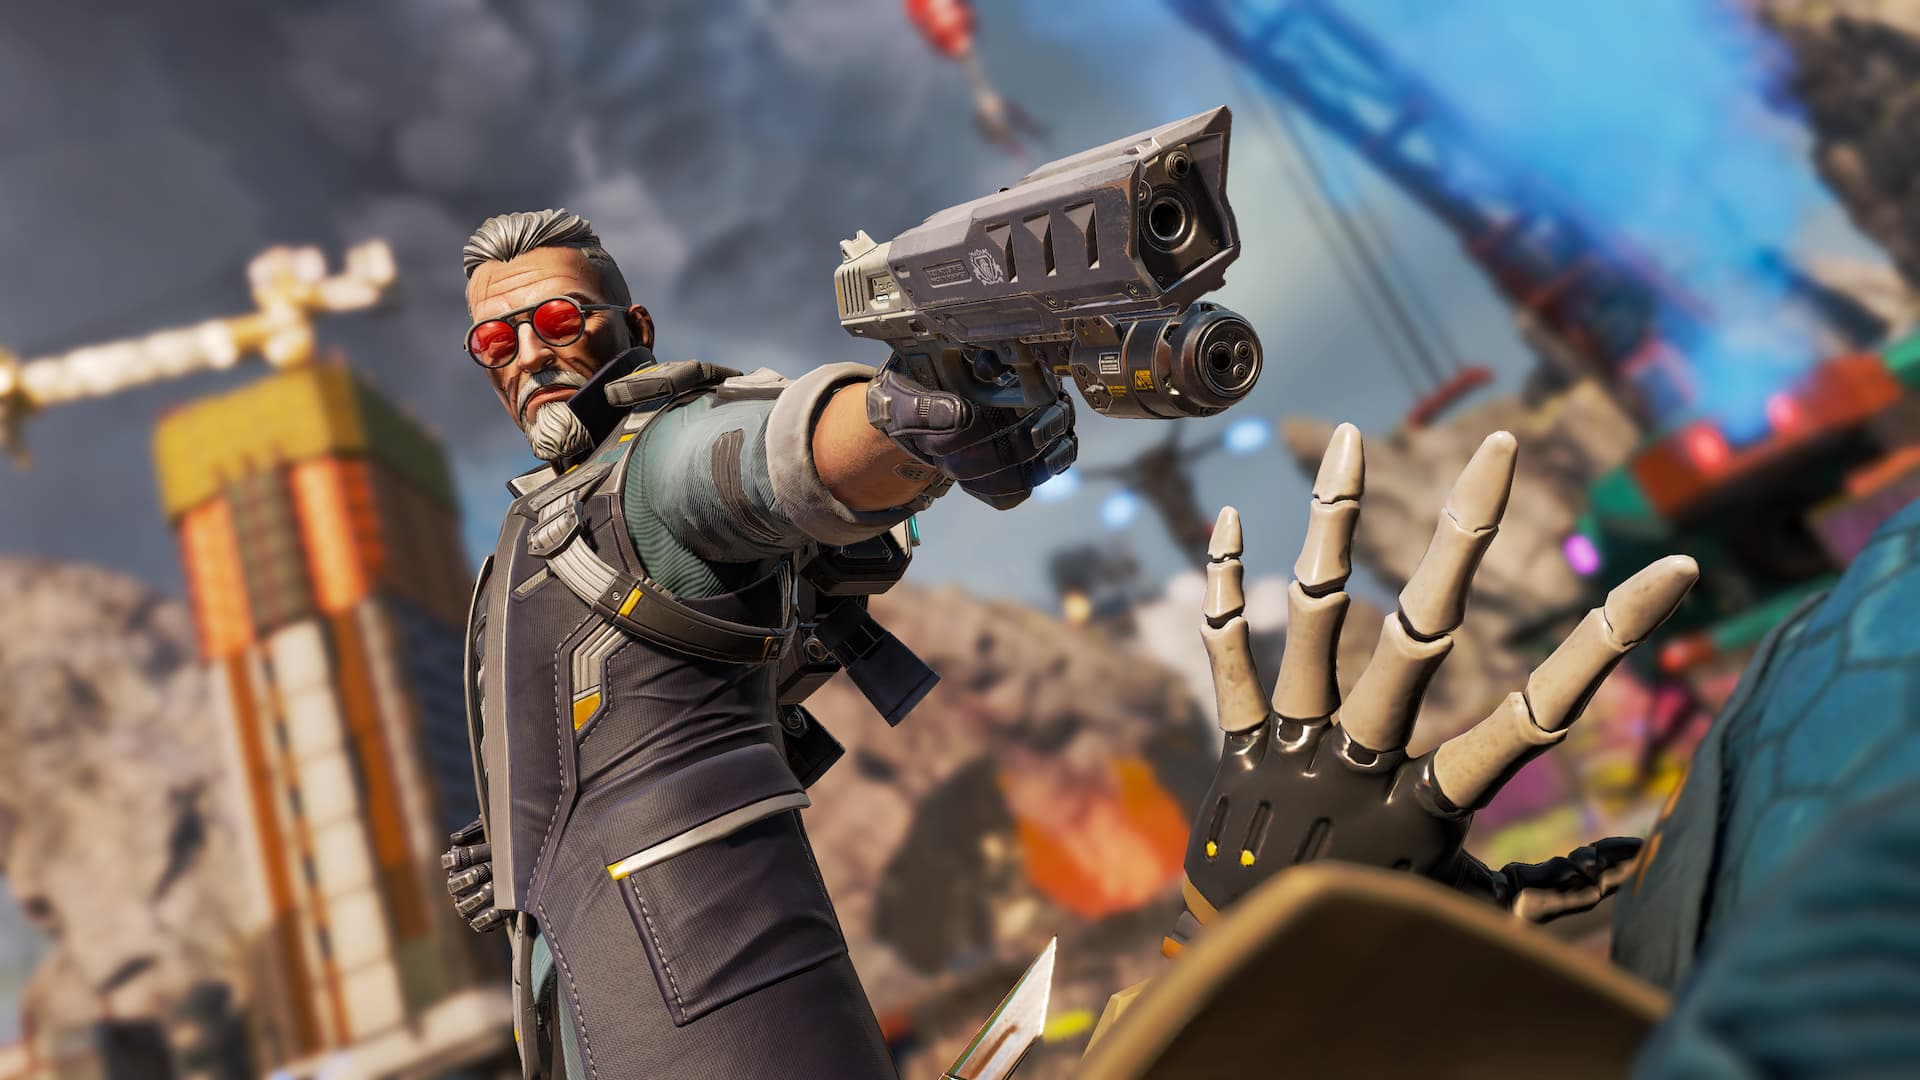 Apex Legends Ballistic -- This old man is armed to the teeth: man with grey hair and sunglasses pointing a gun